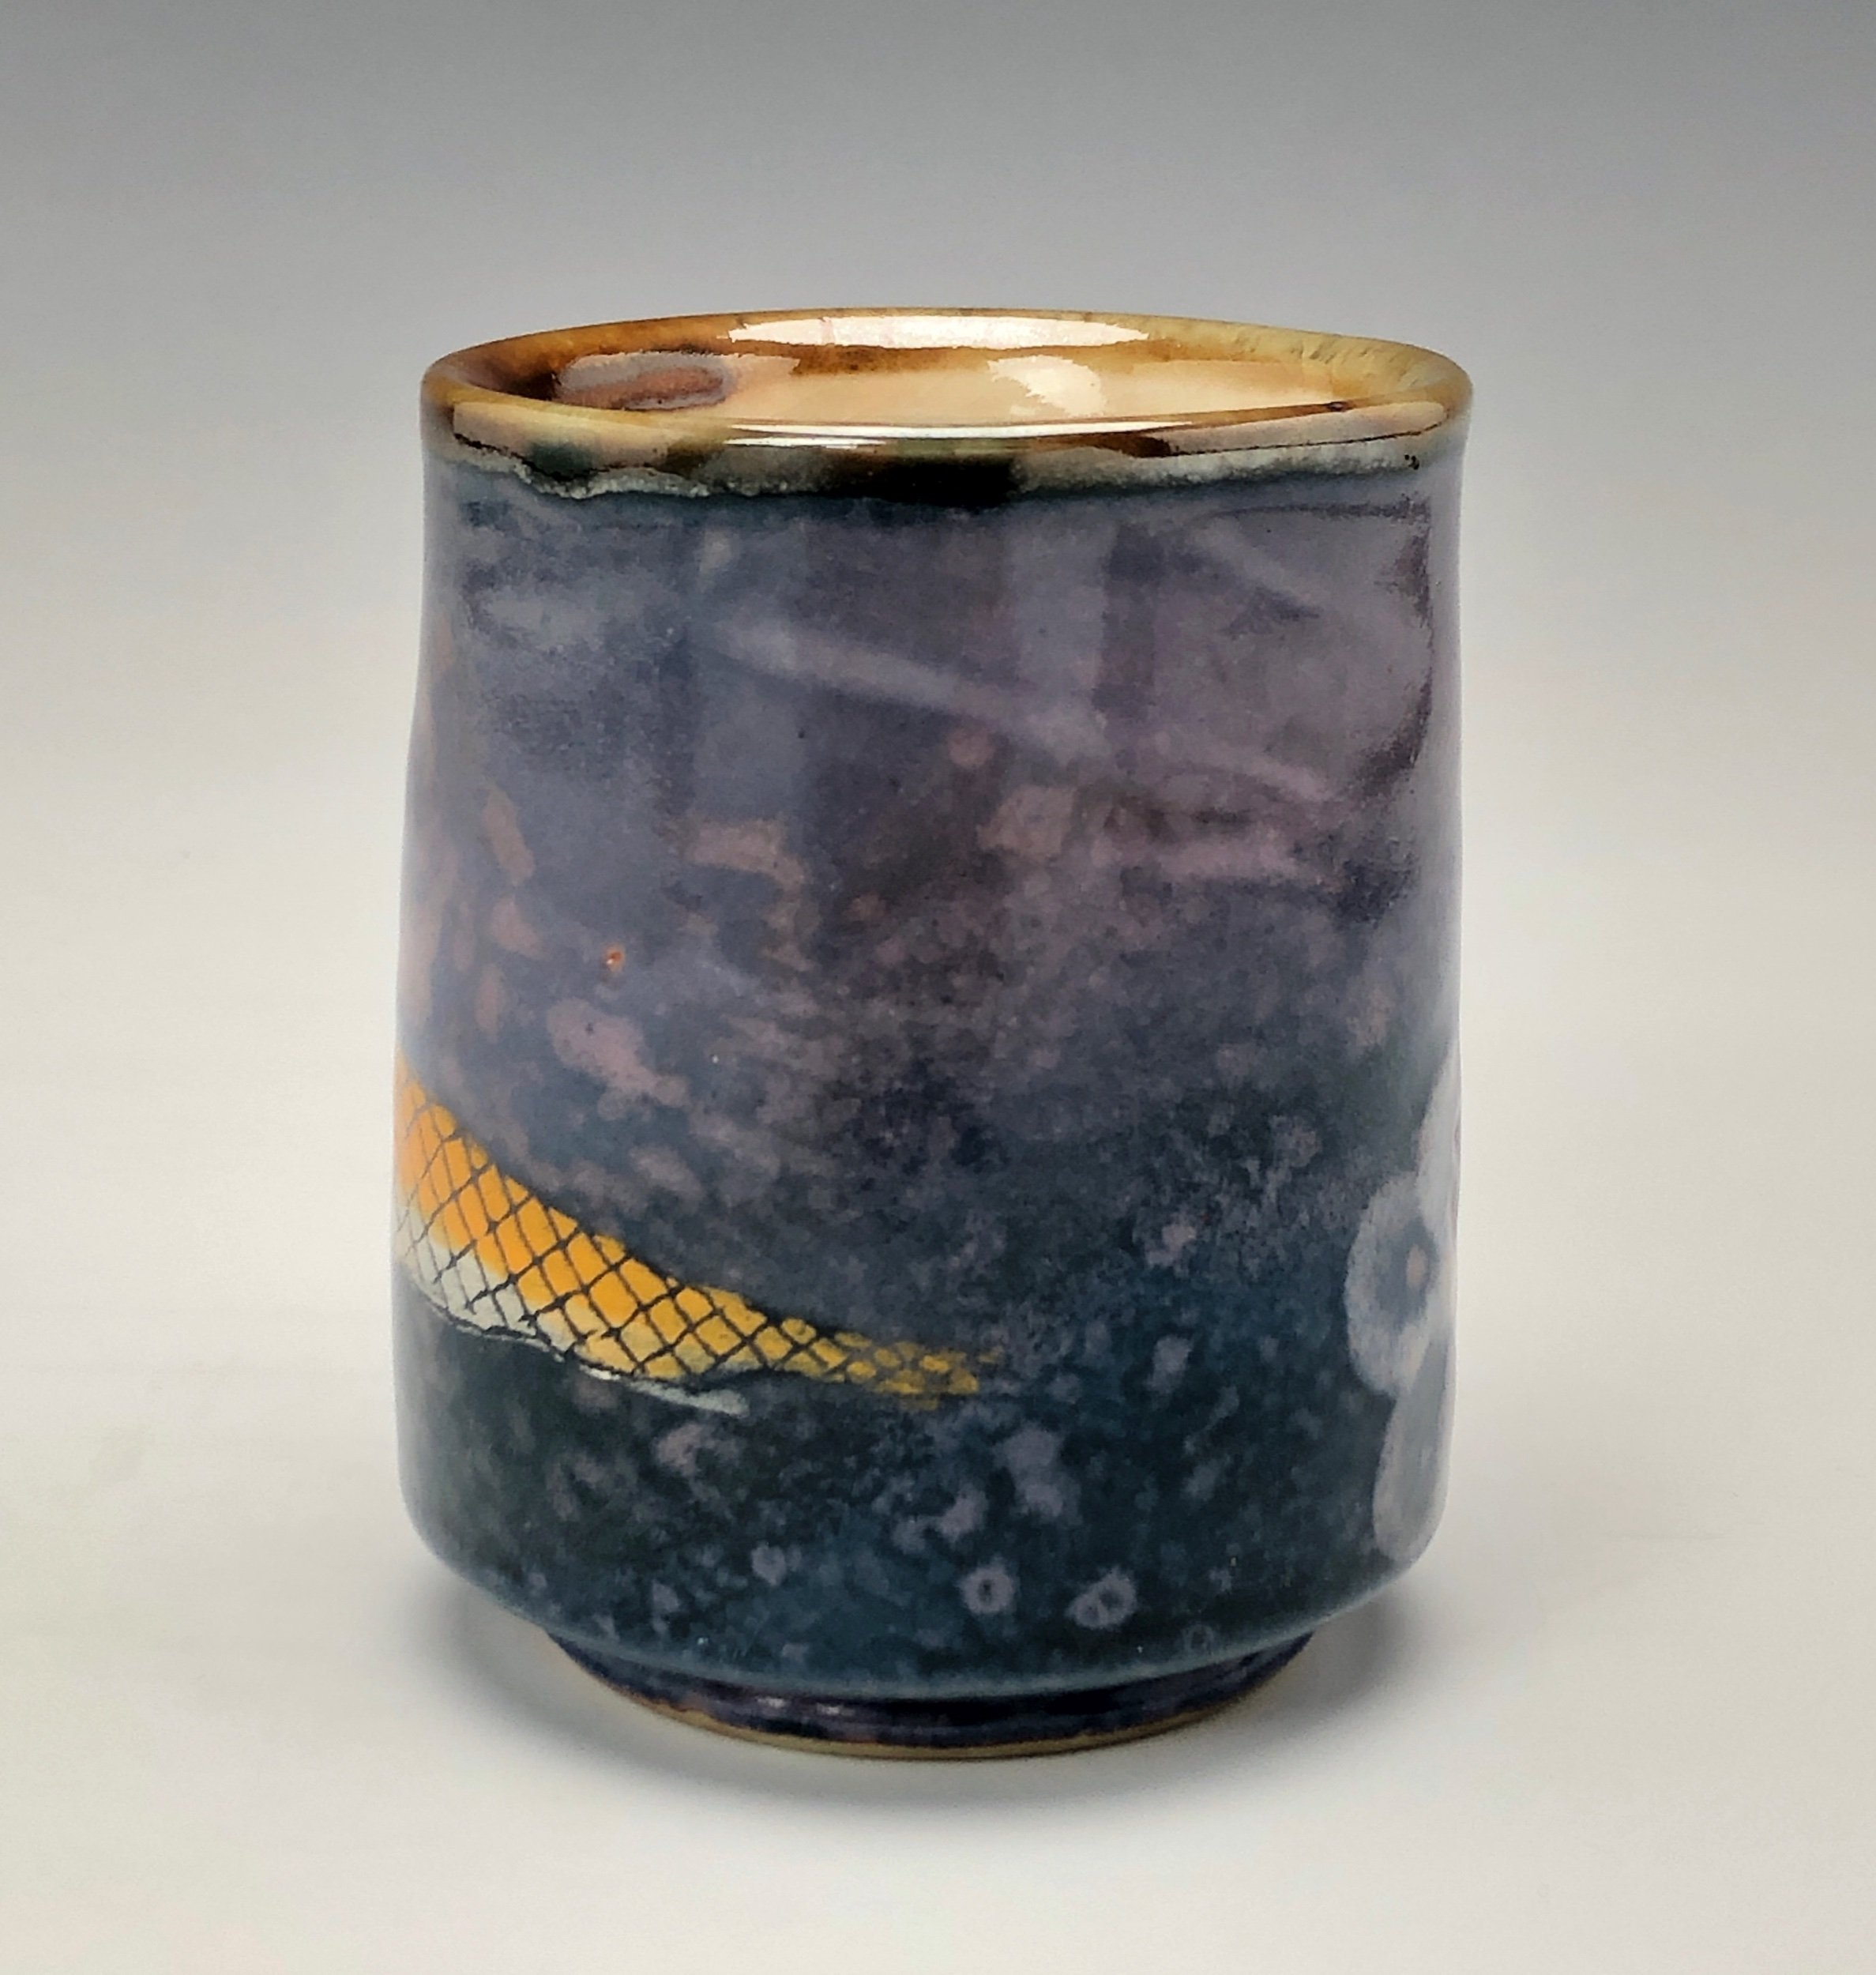  Bruce Gholson, Bulldog Pottery, Seagrove, North Carolina  Yunomi 6- Casual drinking cup made from porcelain. This cup is glazed with a lavender blue shino with a drawn fish in orange over glaze. 